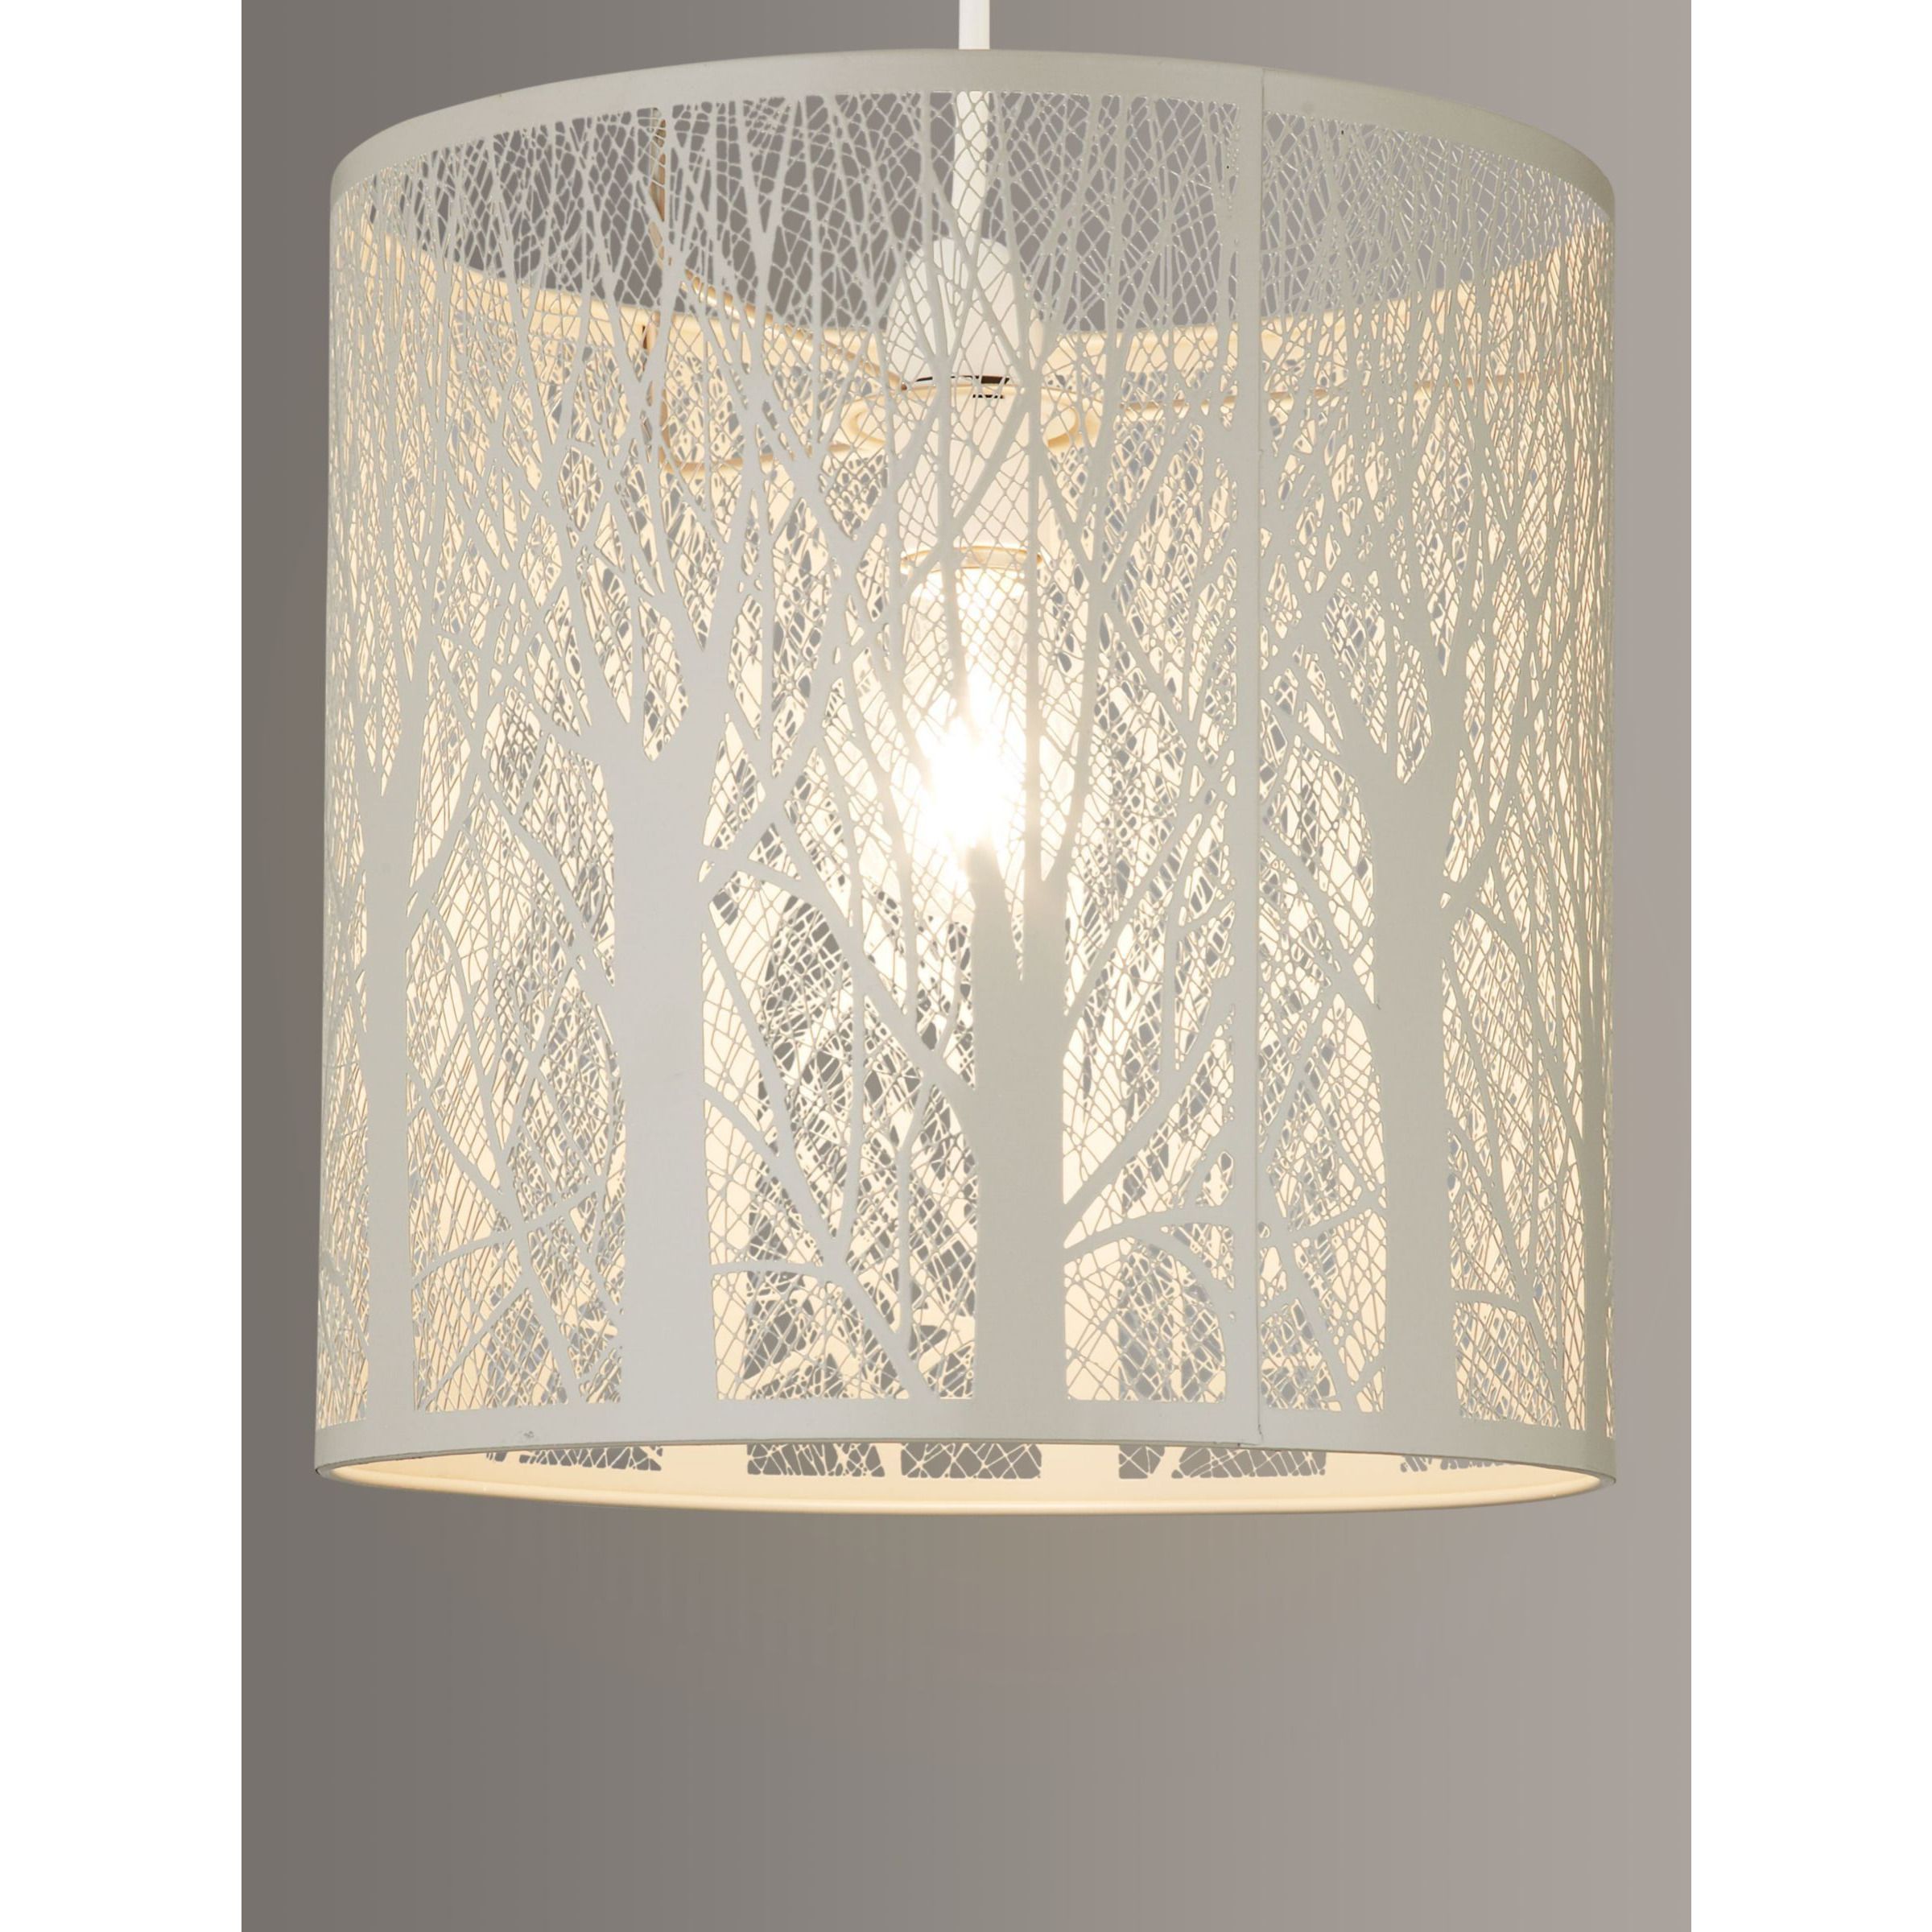 John Lewis Devon Easy-to-Fit Small Ceiling Shade - image 1